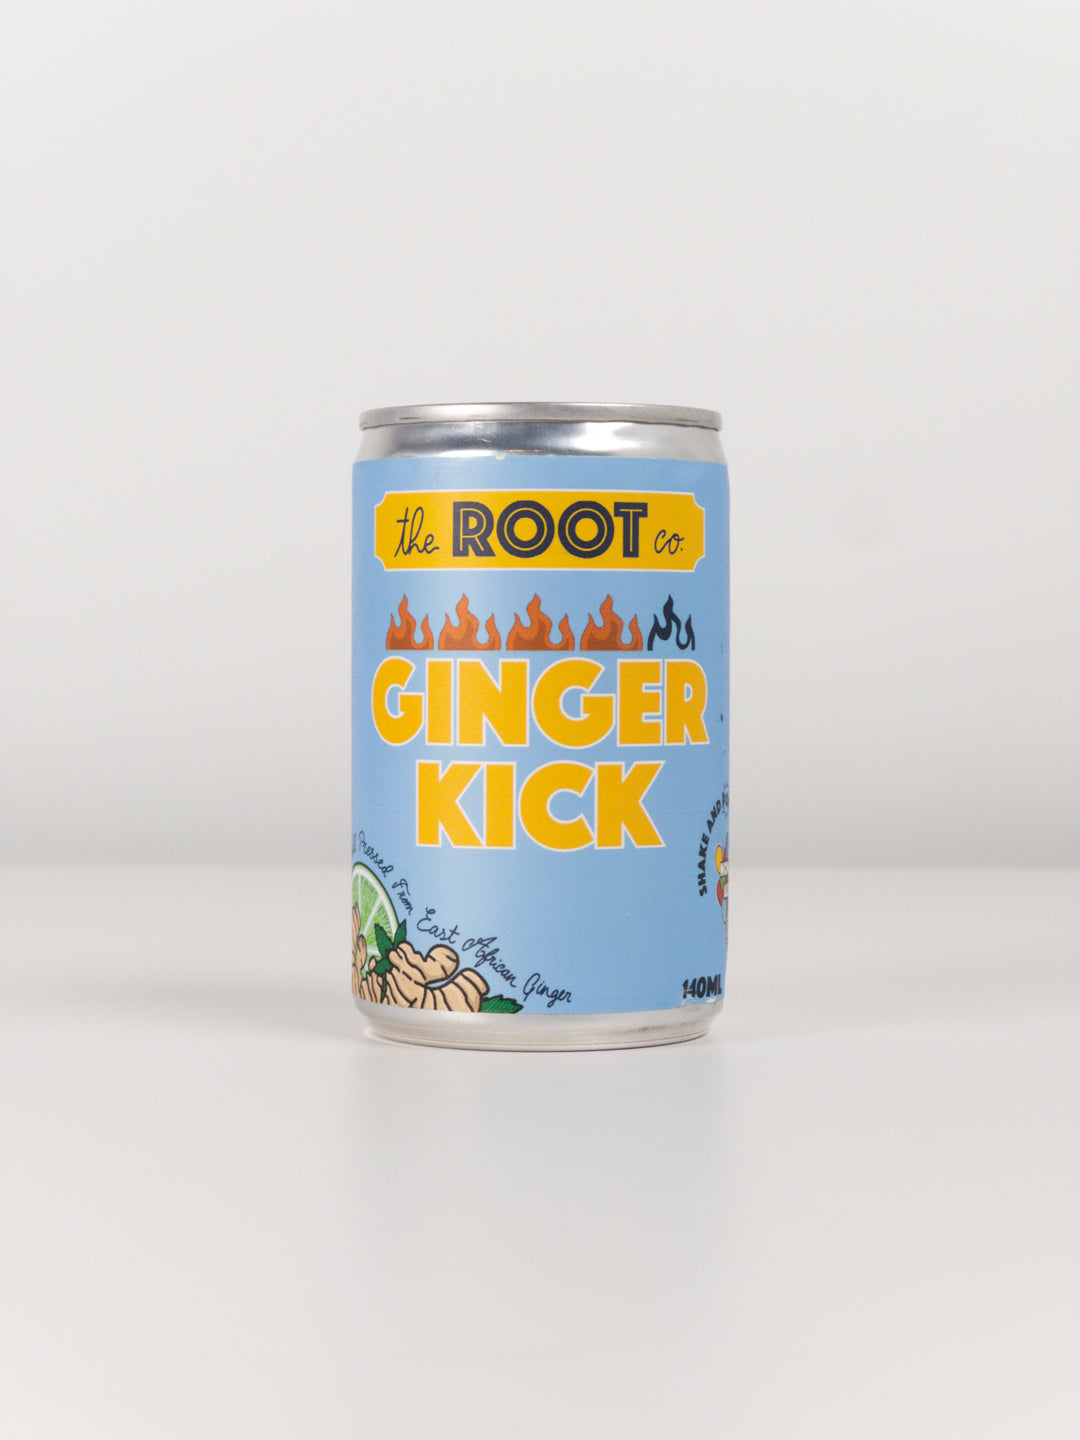 The Root - East African Root Ginger Kick